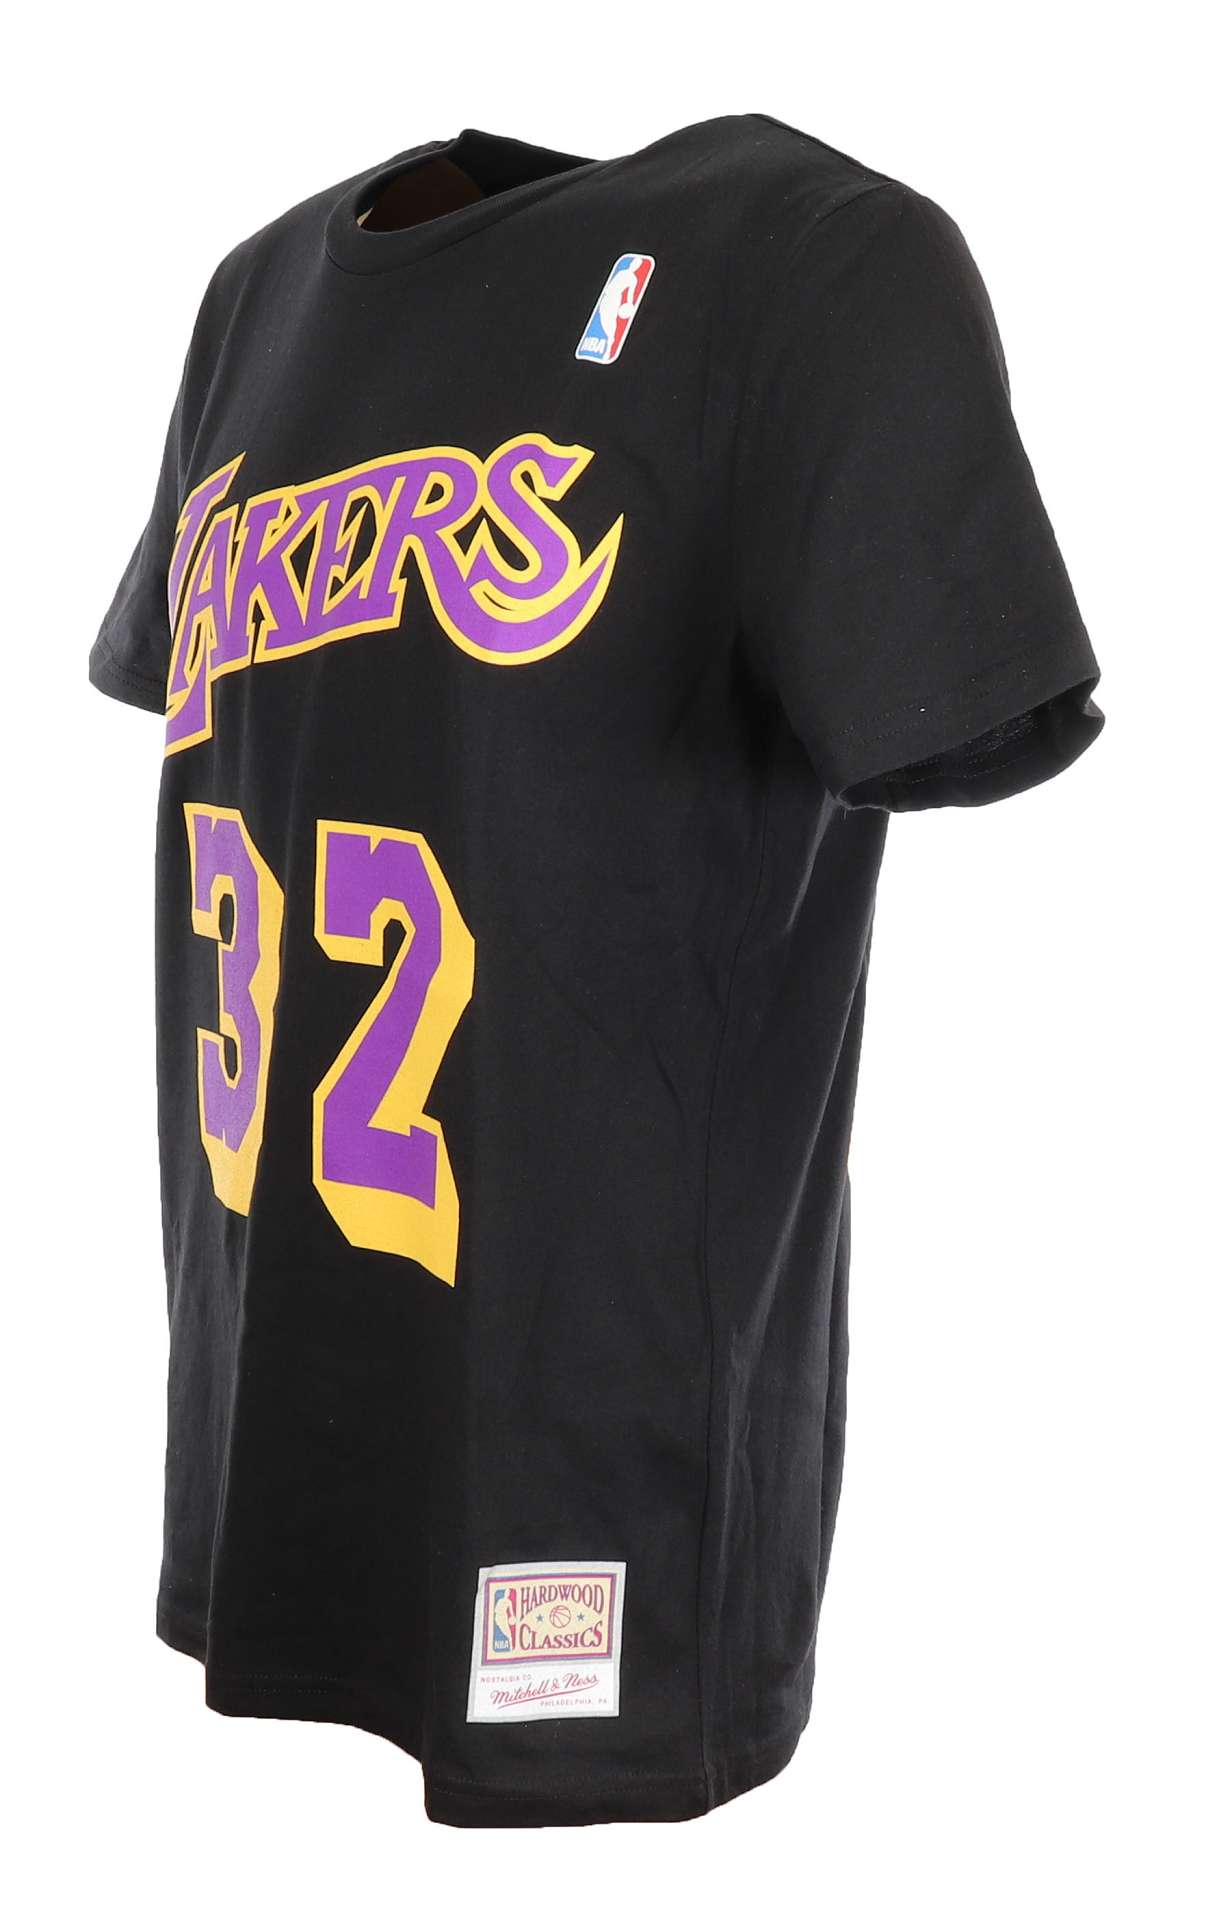 Magic Johnson #32 Los Angeles Lakers Black NBA Name and Number Tee T-Shirt Mitchell & Ness